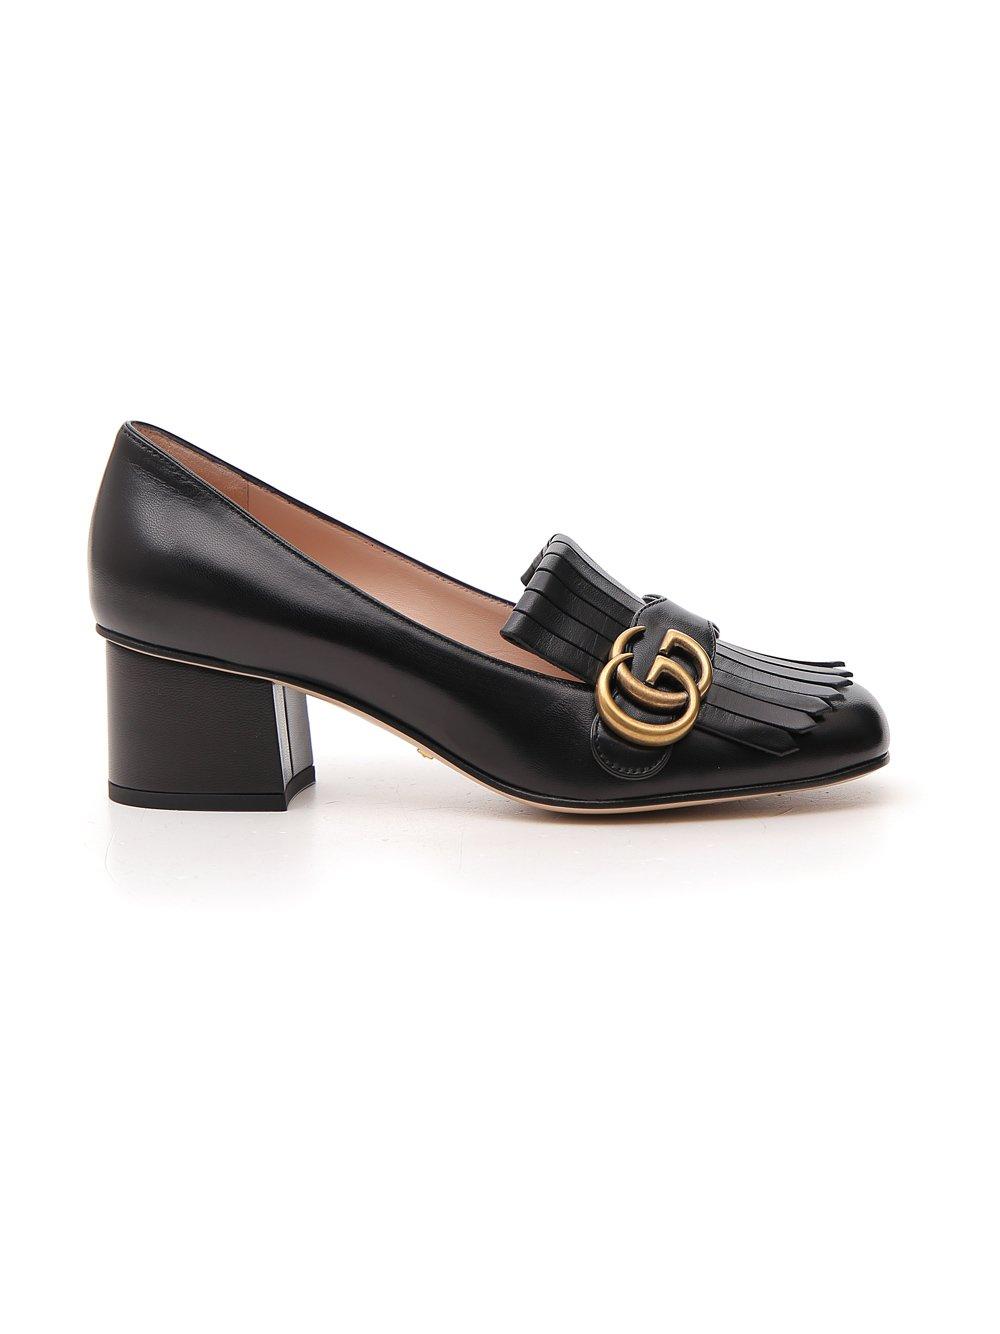 Gucci Leather Mid-Heel Marmont Pump in Black | Lyst